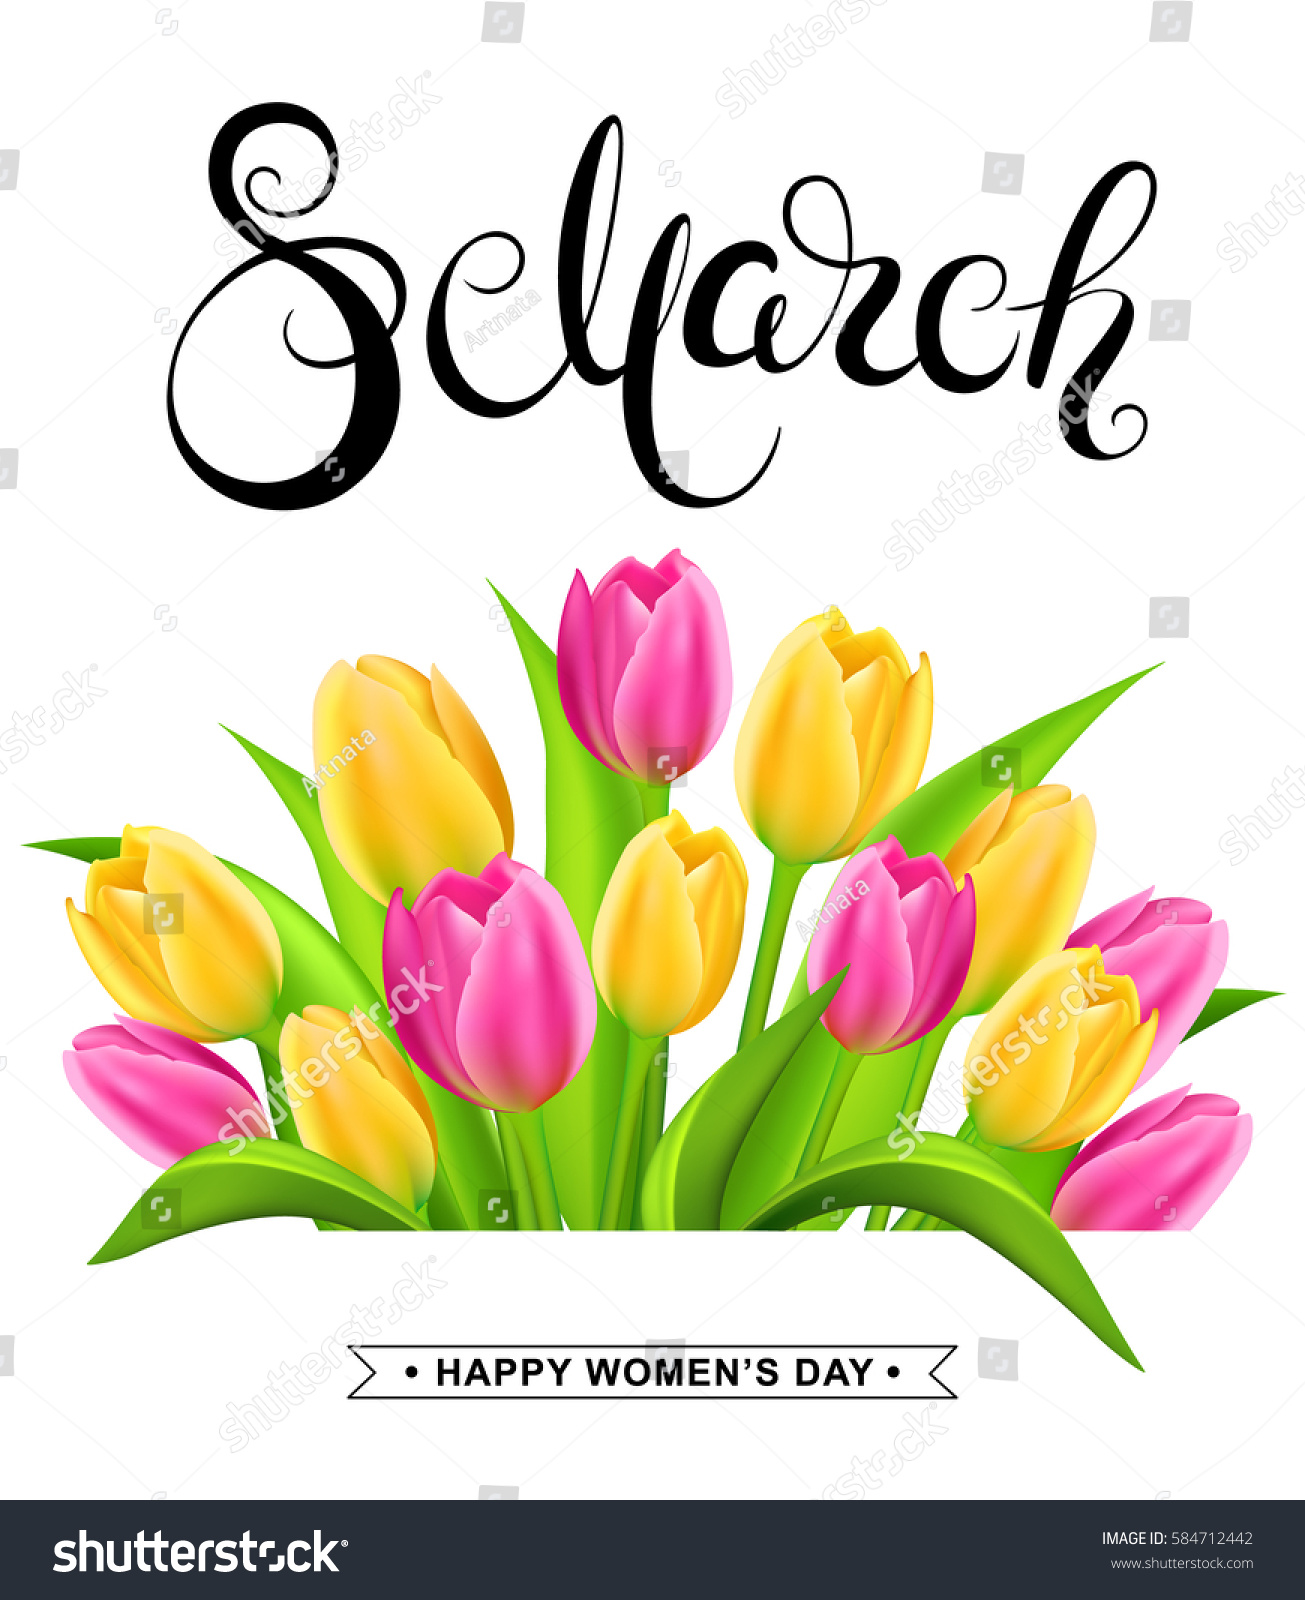 8 march banner with handwritten calligraphy lettering and tulips bouquet. Happy women's day card.  Vector illustration. #584712442